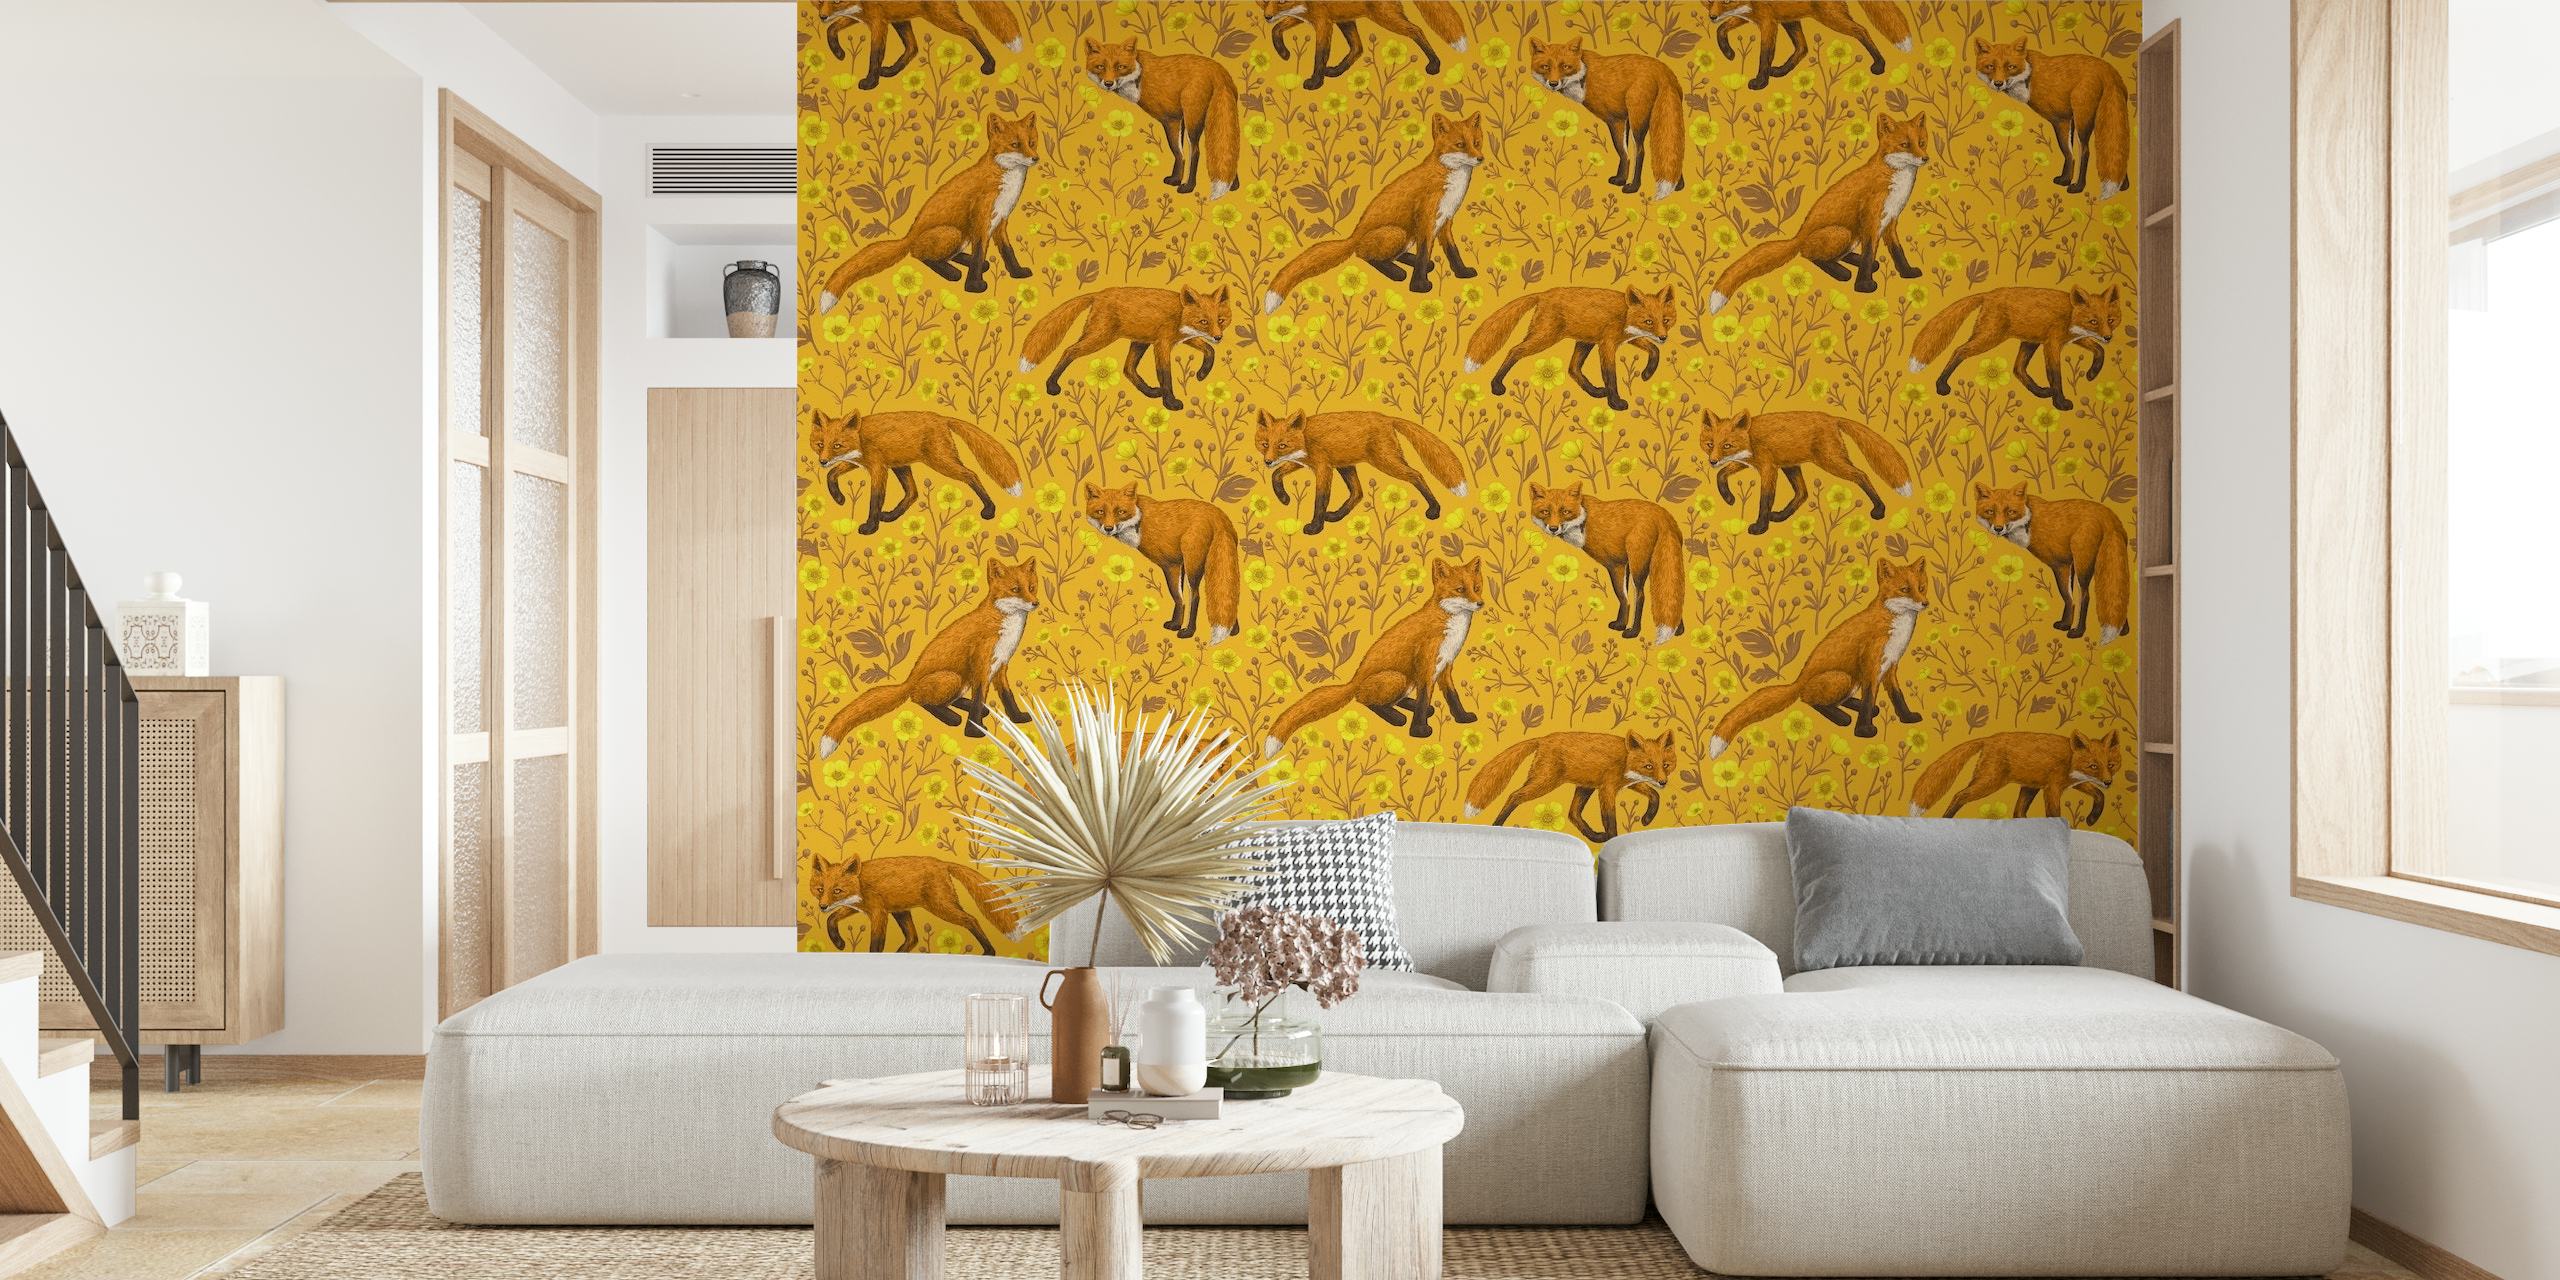 Warm orange wall mural with playful foxes and buttercup flowers design